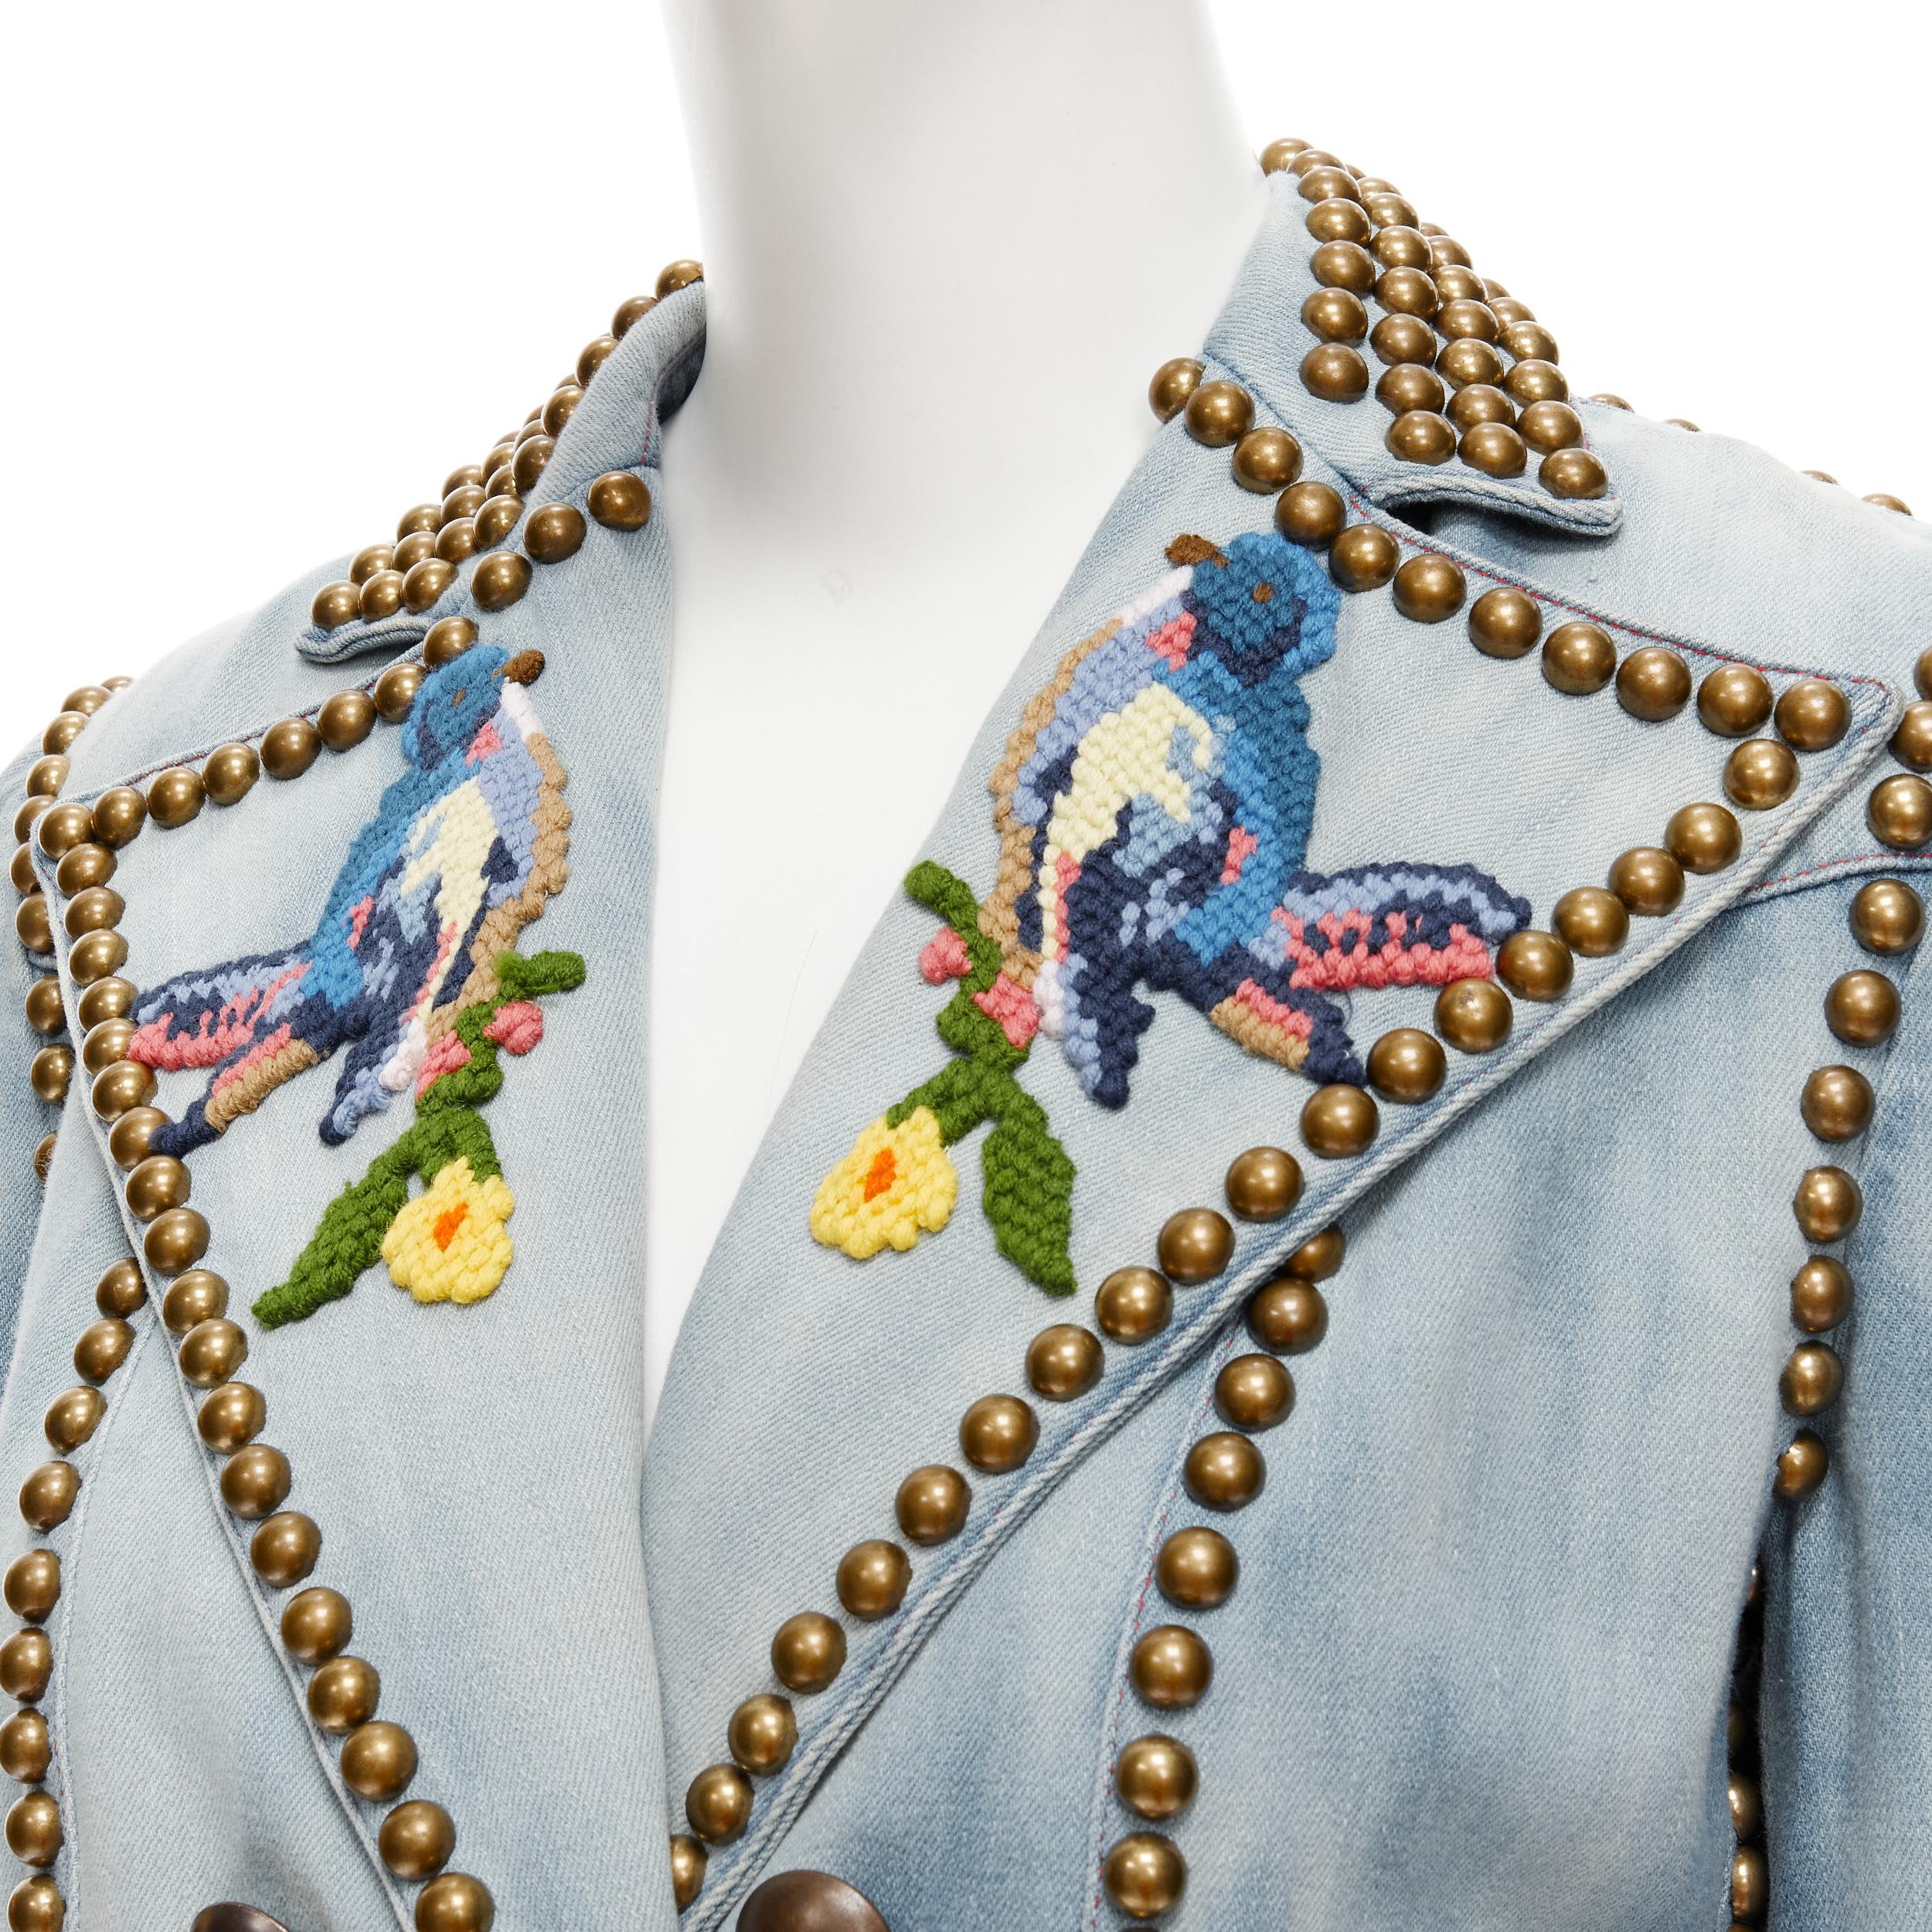 new GUCCI blue acid washed bird embroidered gold studded denim blazer IT42 M 
Reference: TGAS/B02014 
Brand: Gucci 
Designer: Alessandro Michele 
Material: Denim 
Color: Blue 
Pattern: Solid 
Closure: Button 
Extra Detail: Acid washed blue denim.